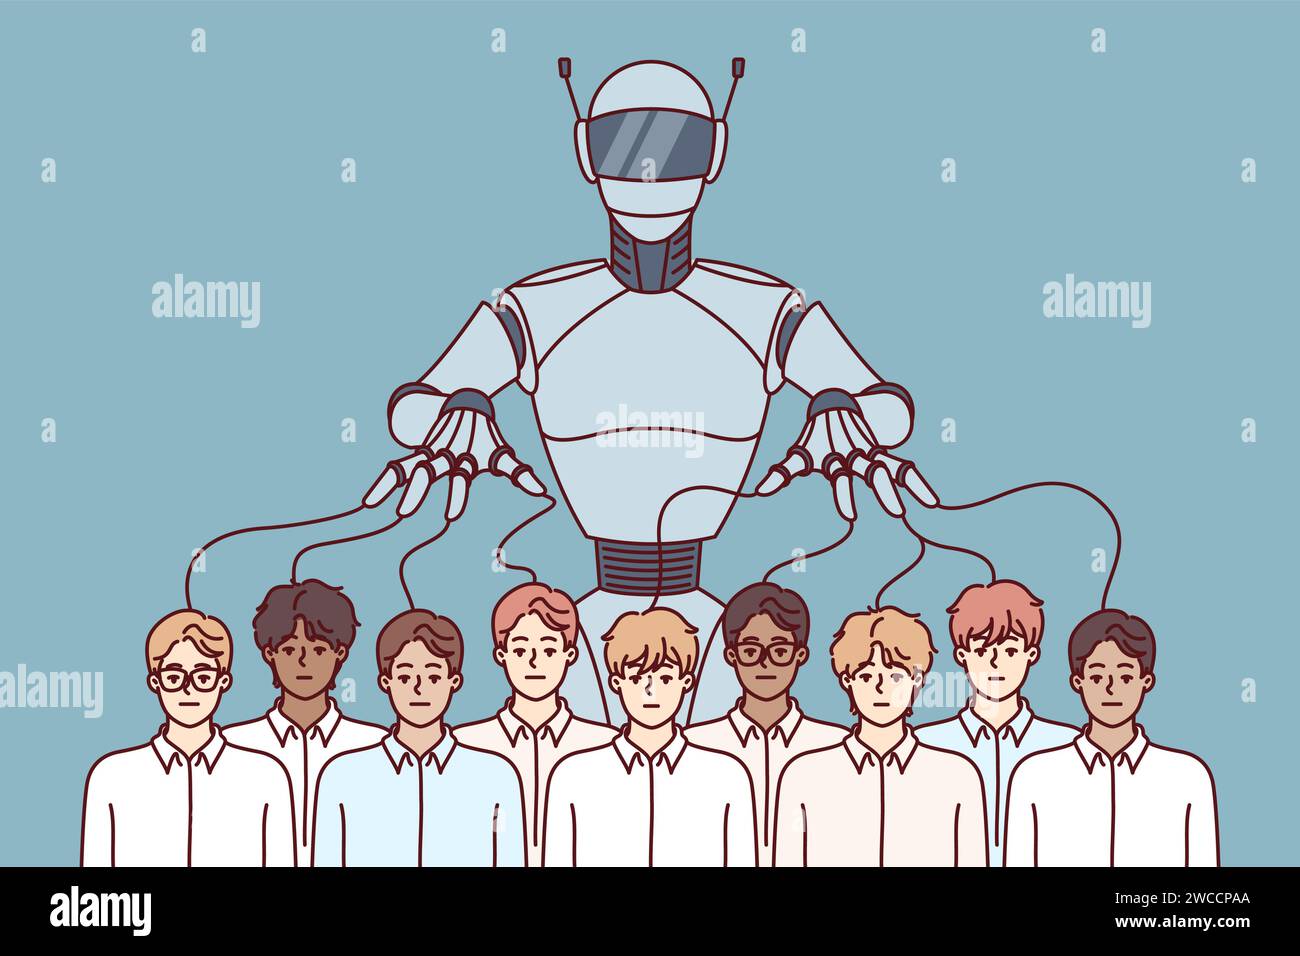 Robot manipulates crowd of people using puppeteer strings and symbolizing problems caused by artificial intelligence. Business puppets are controlled by robot created using AI technology Stock Vector